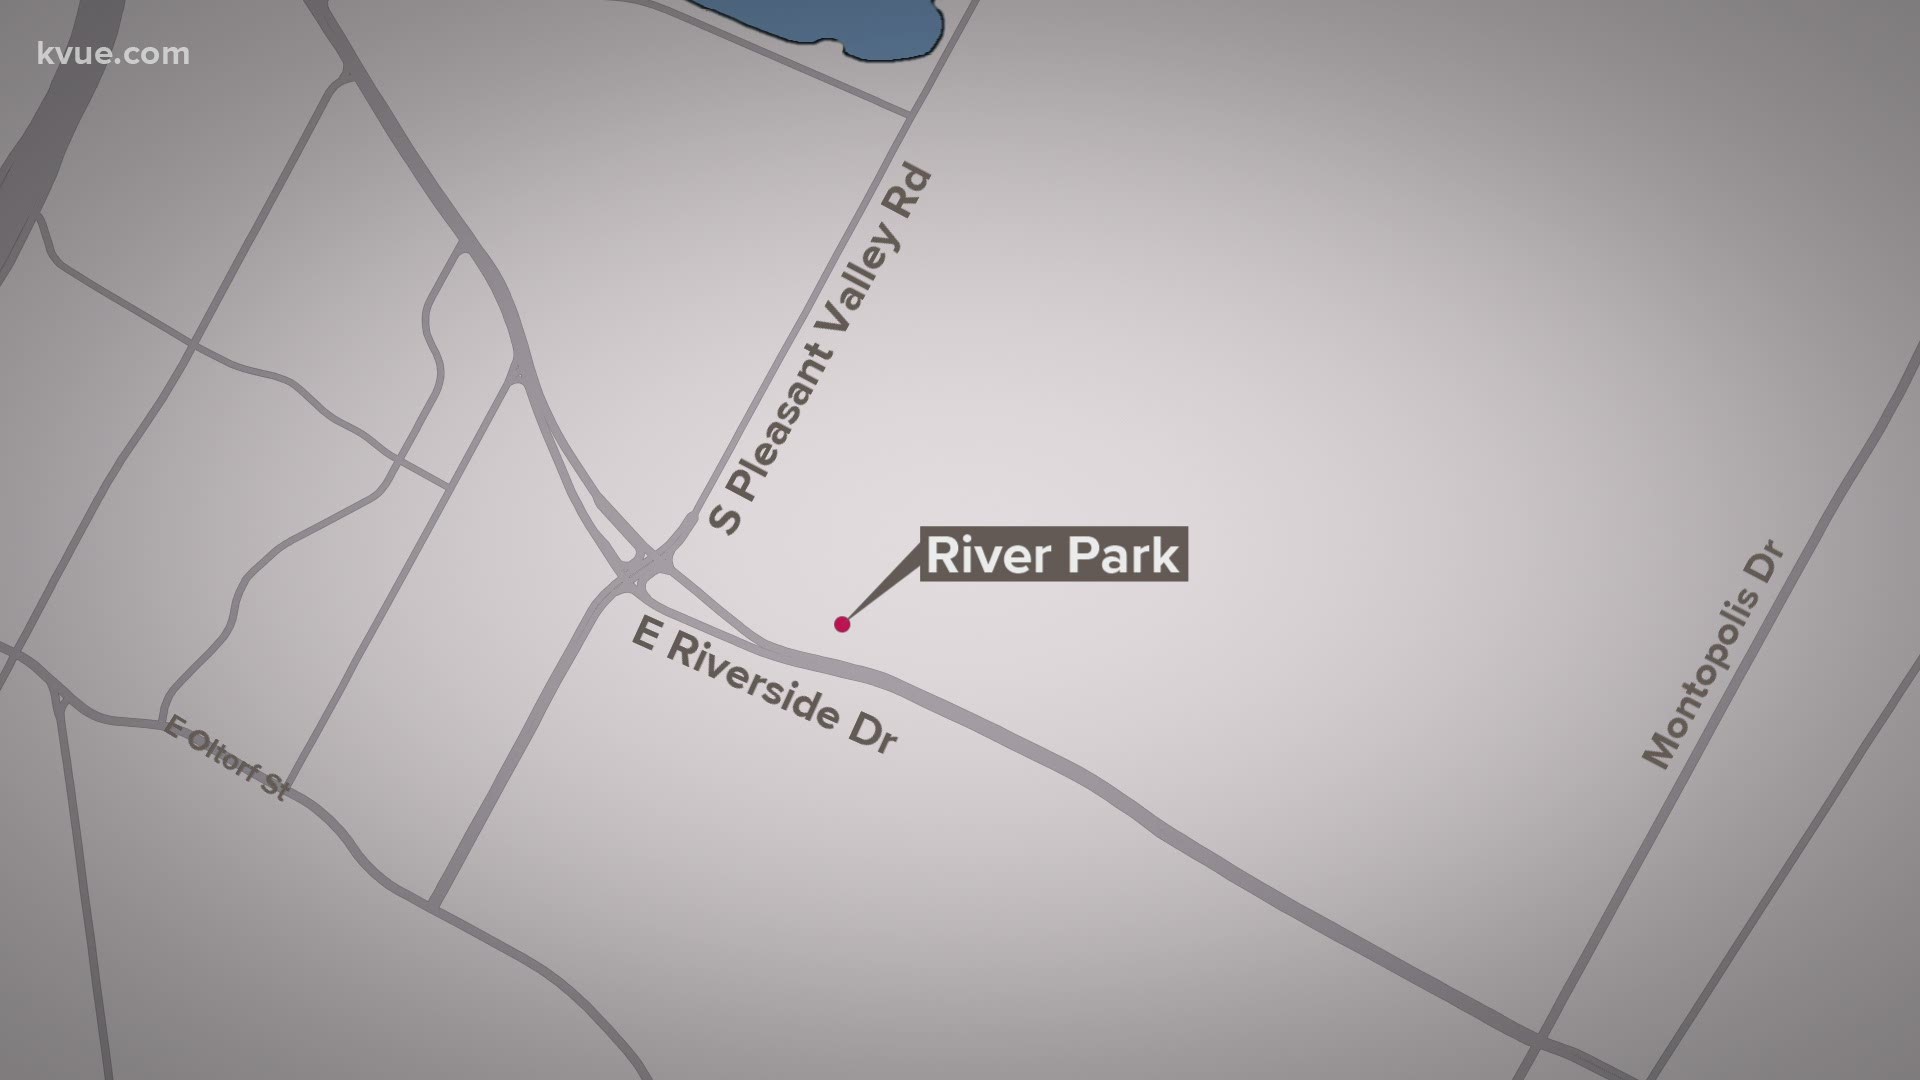 A controversial development in southeast Austin has a new name. 4700 East Riverside, a 100-acre mixed-use development, will now be called River Park.